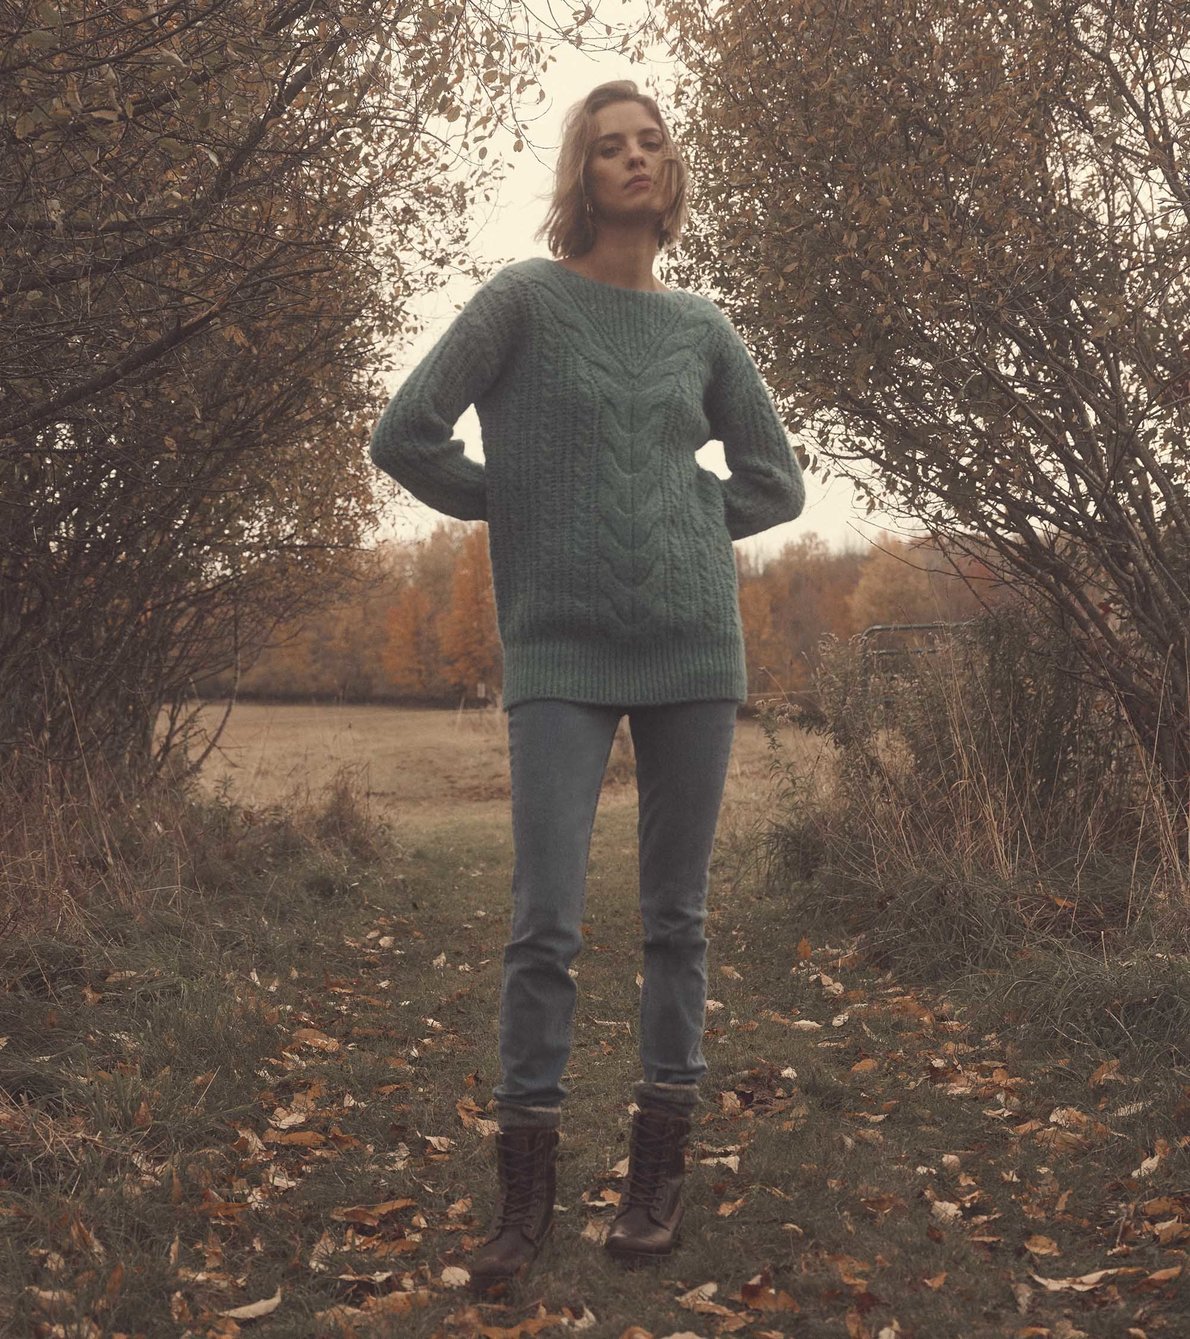 View larger image of Parker Cable Knit Tunic - Aqua Green